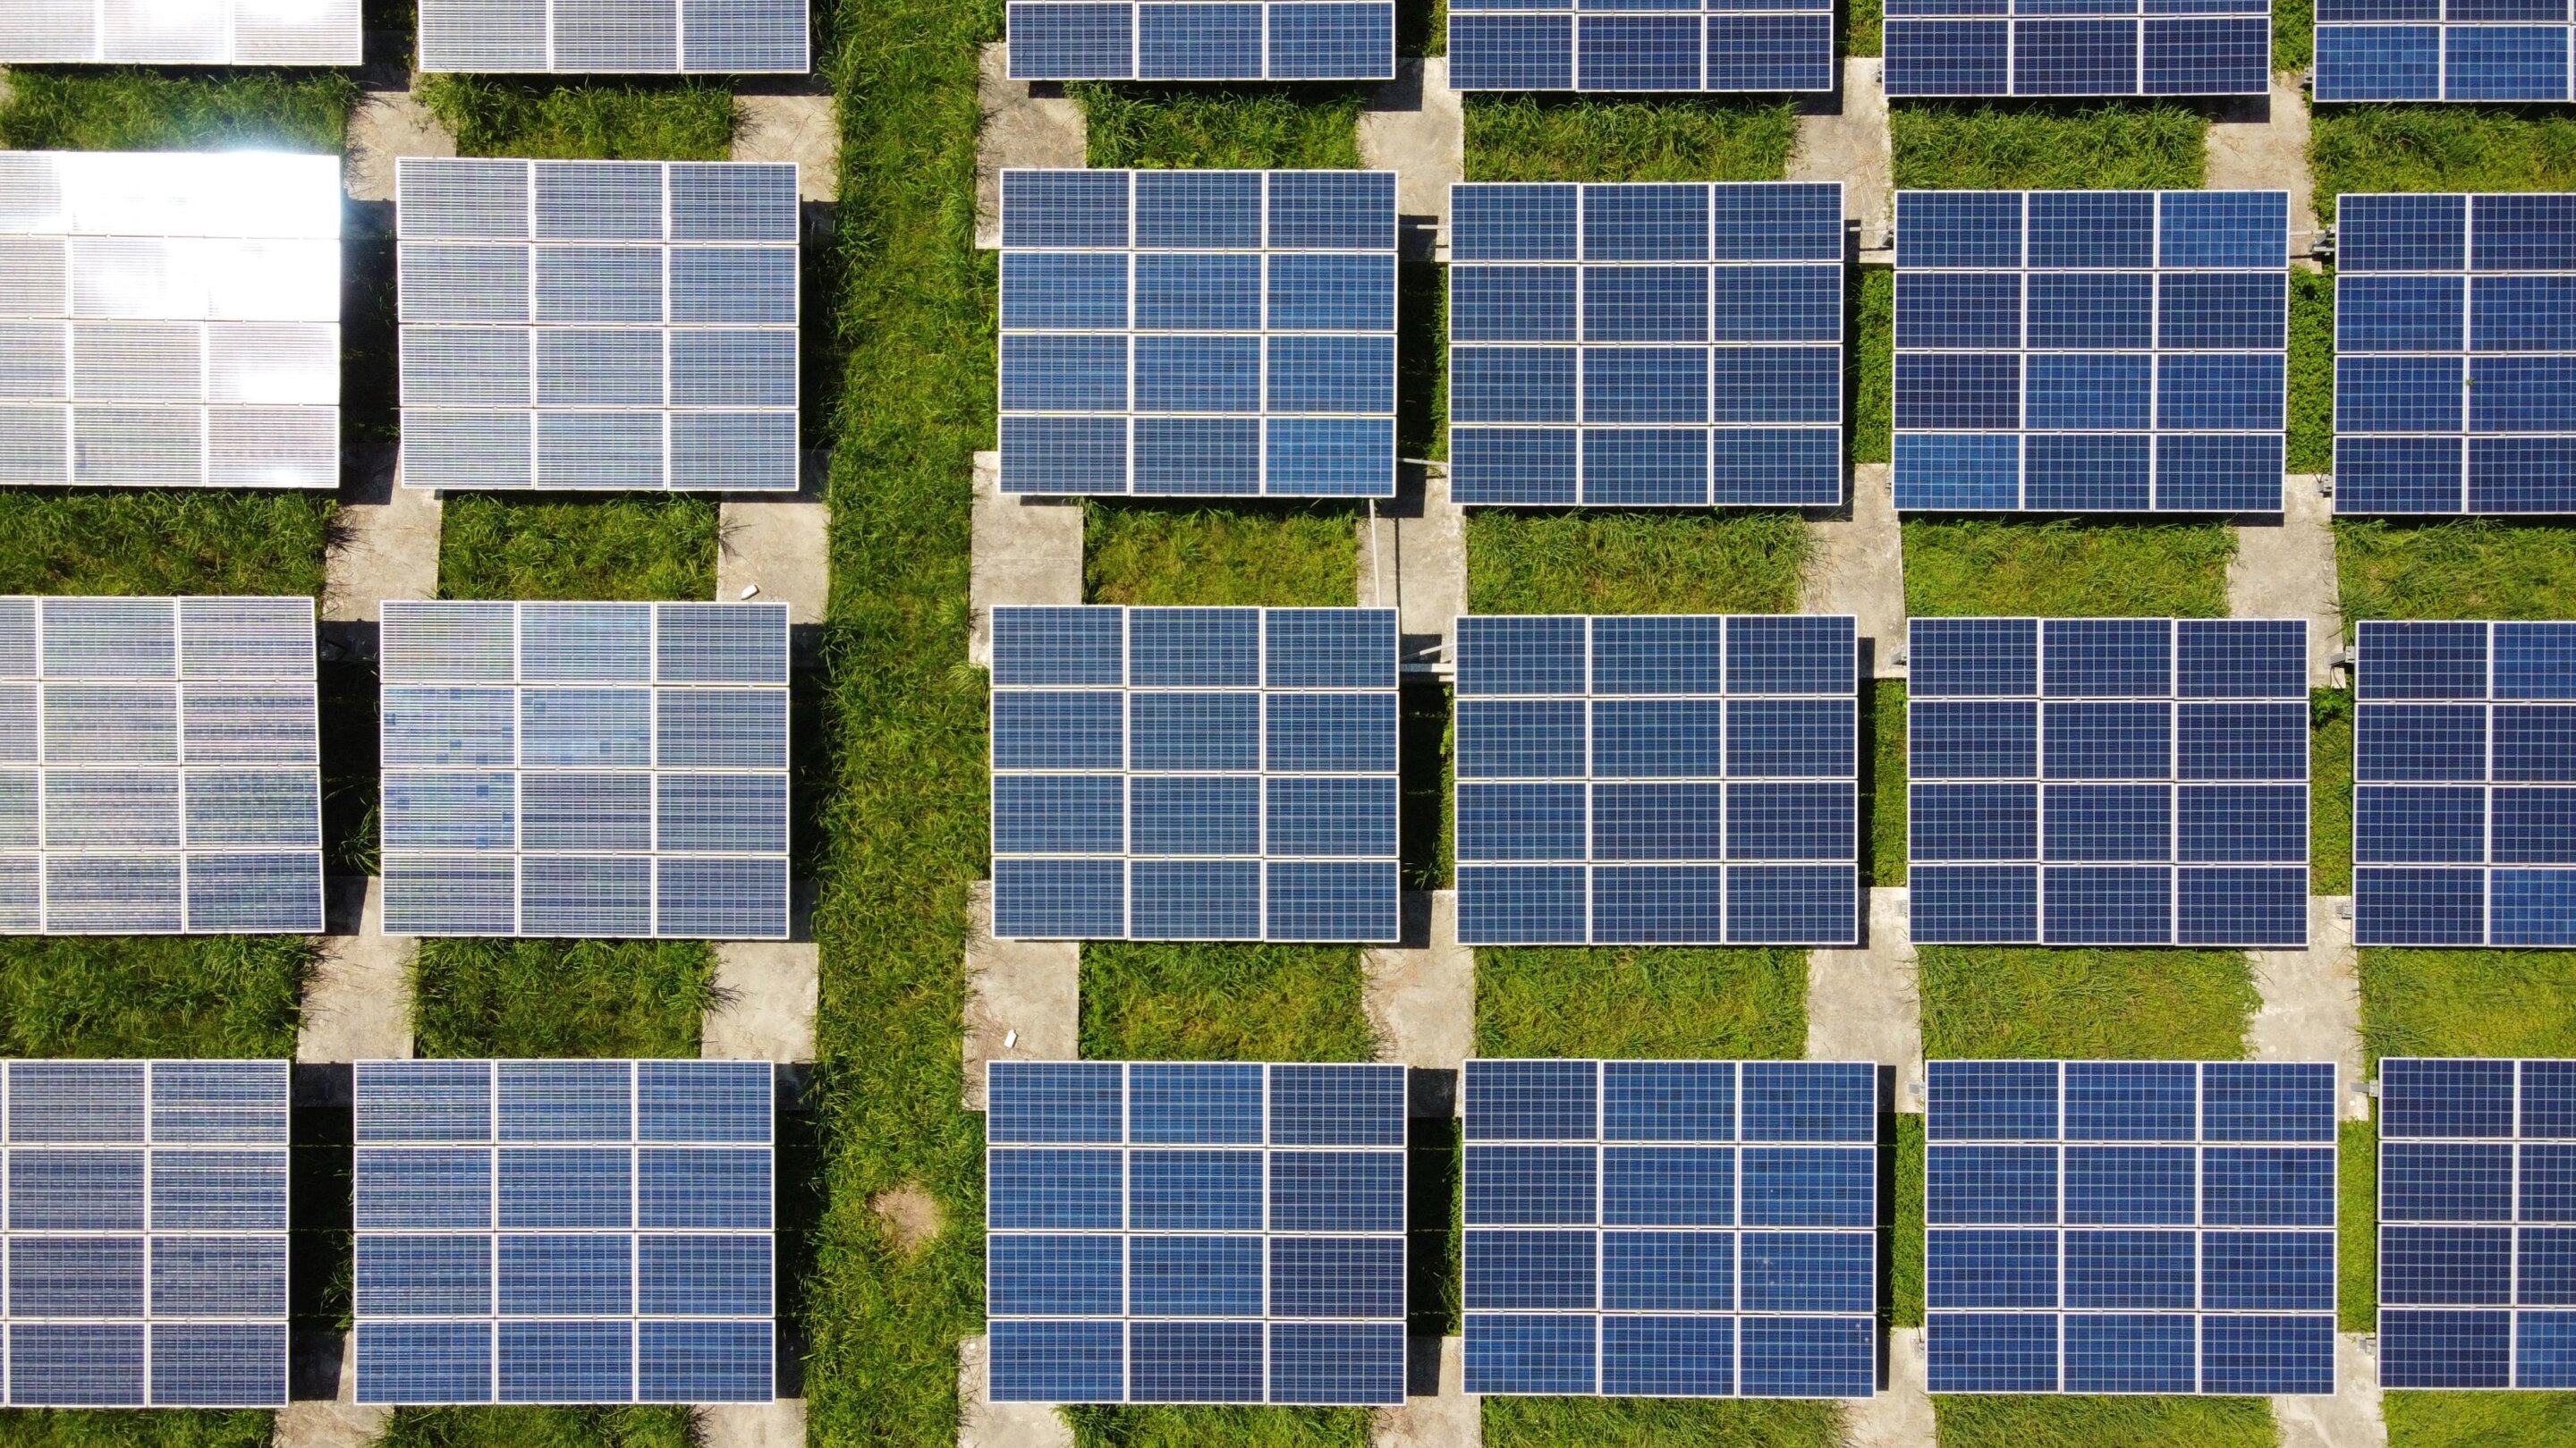 As many rooftops as possible: Recommendations for an ambitious EU-wide solar mandate